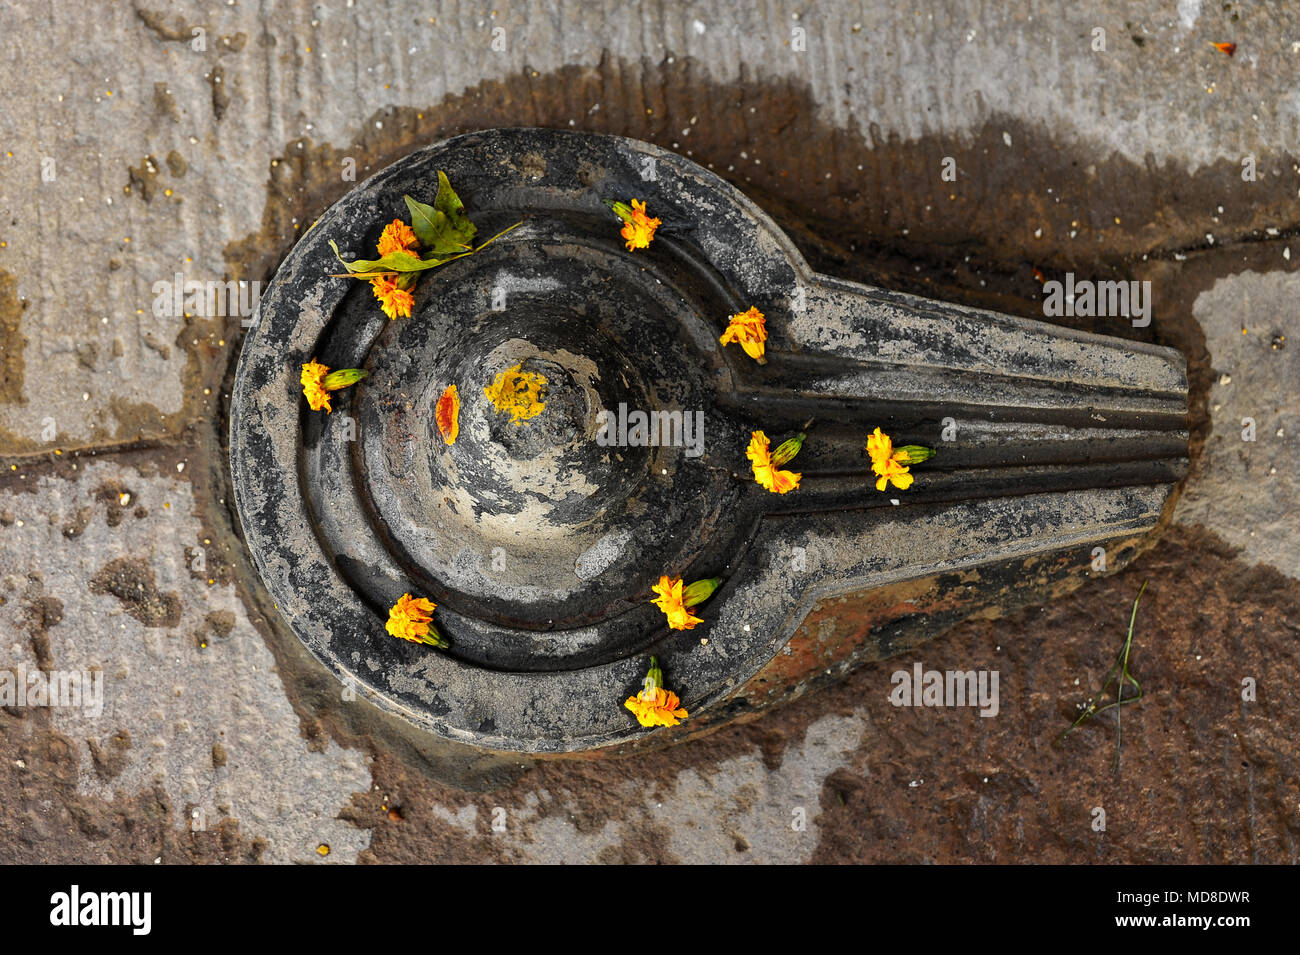 A Shiva lingum decorated with marigolds Stock Photo